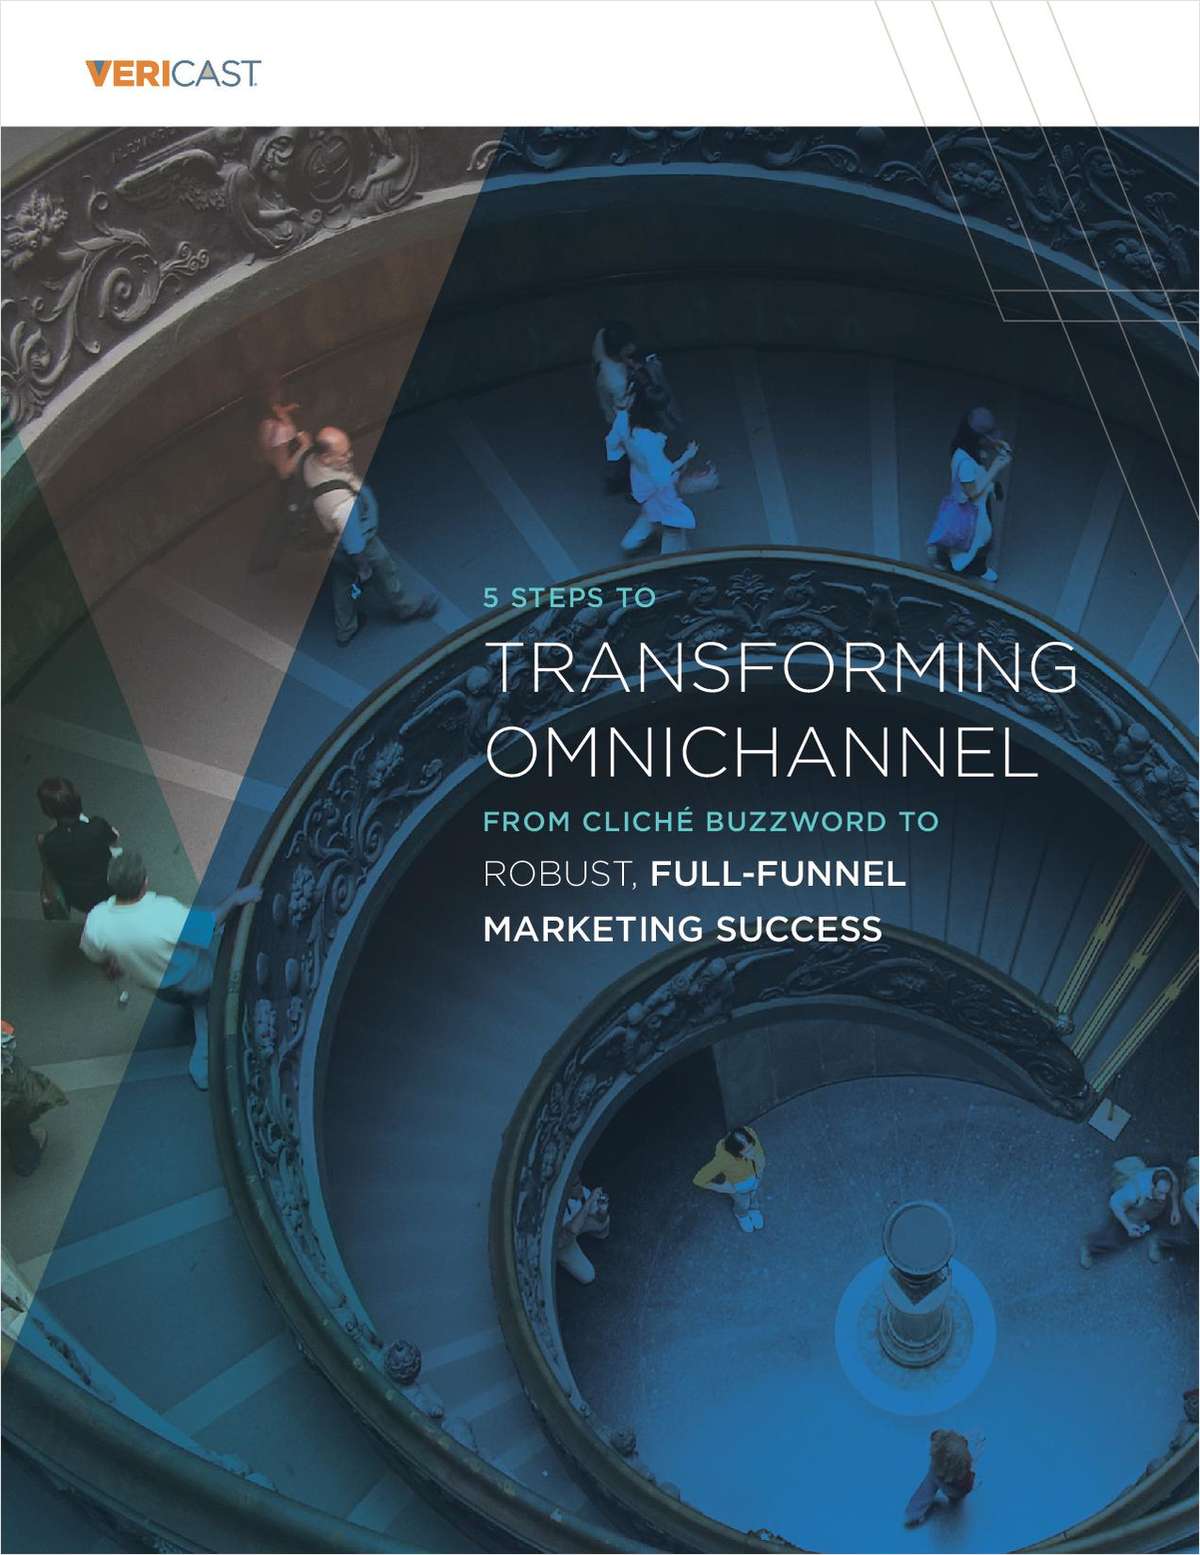 Transform Omnichannel from Buzzword to Marketing Success: 5 Steps